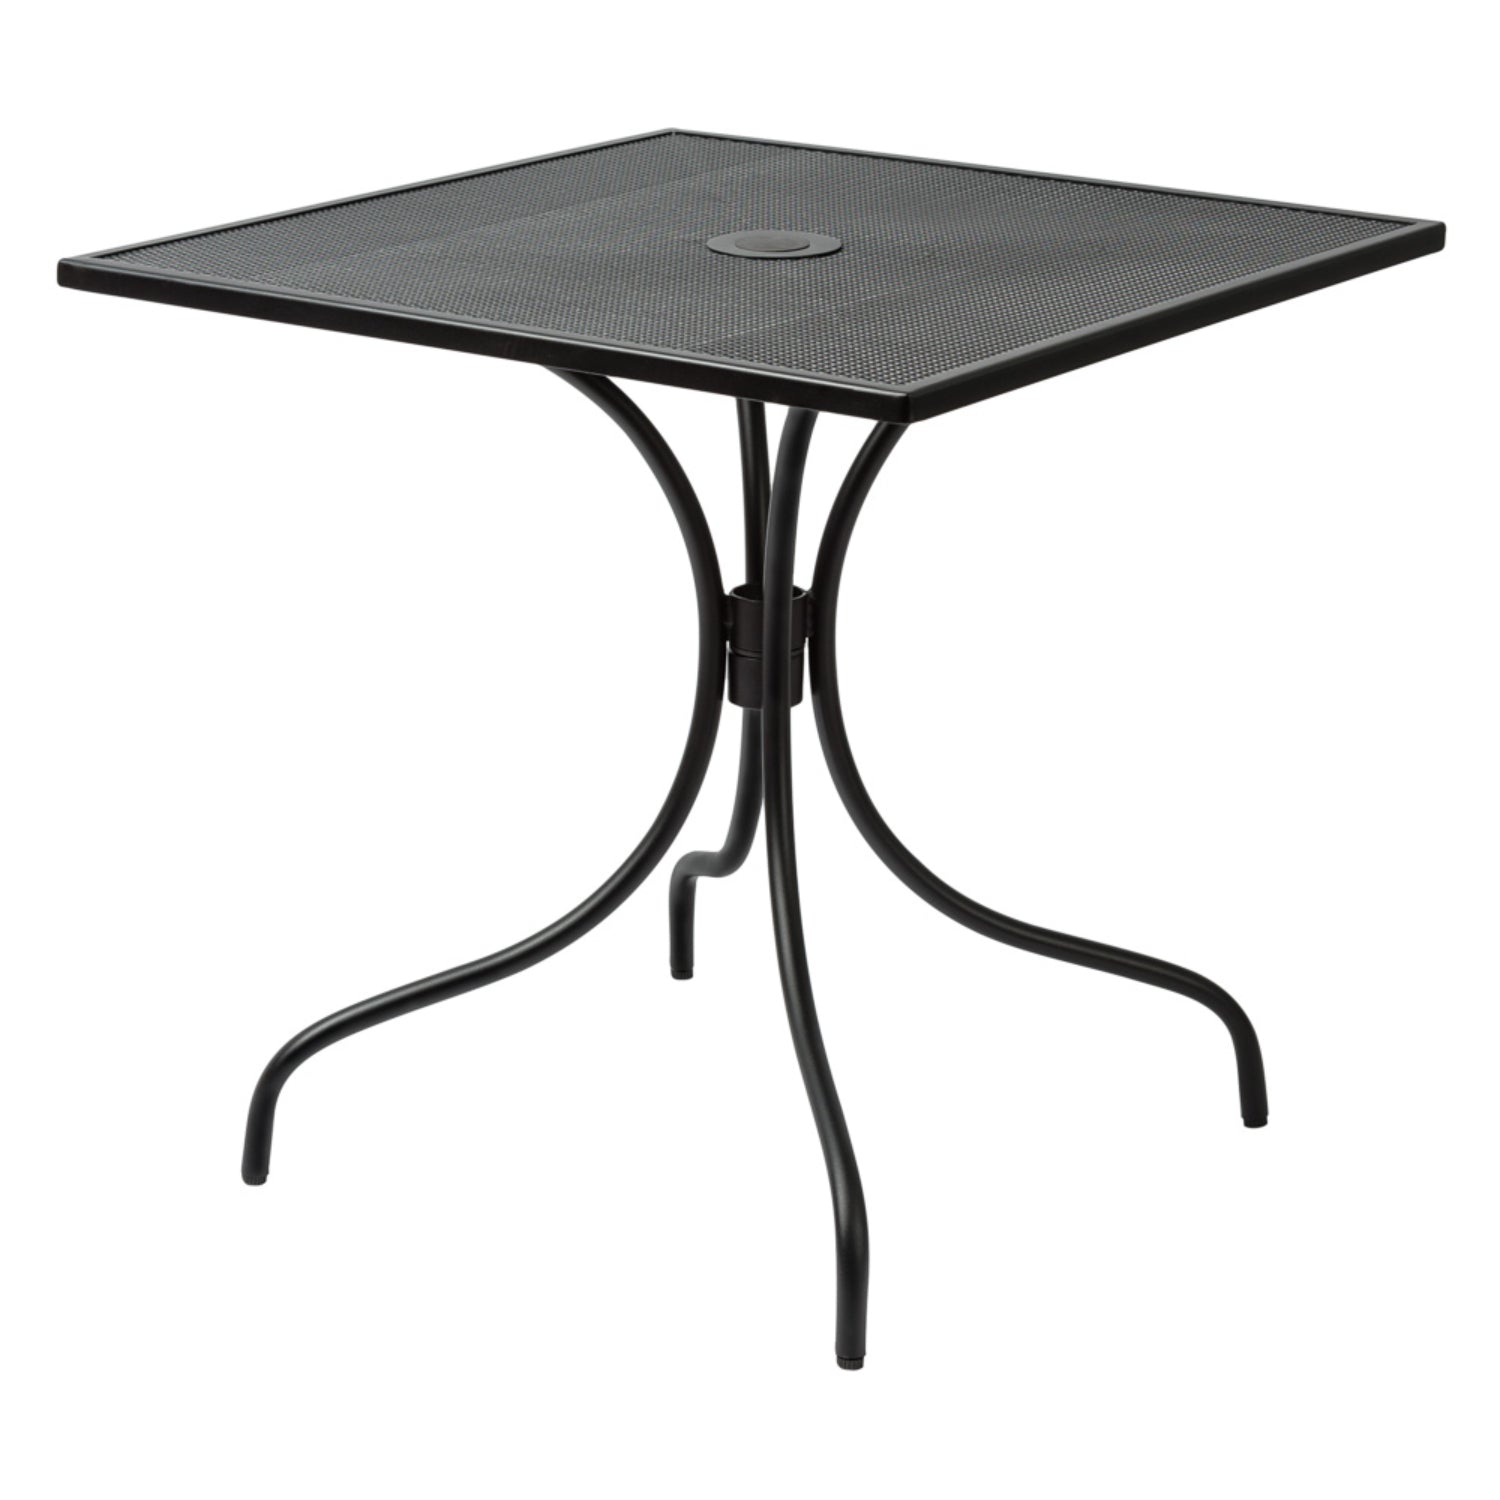 Barnegat Collection Outdoor/Indoor Black Steel 30" Square Dining Height Table with Umbrella Hole